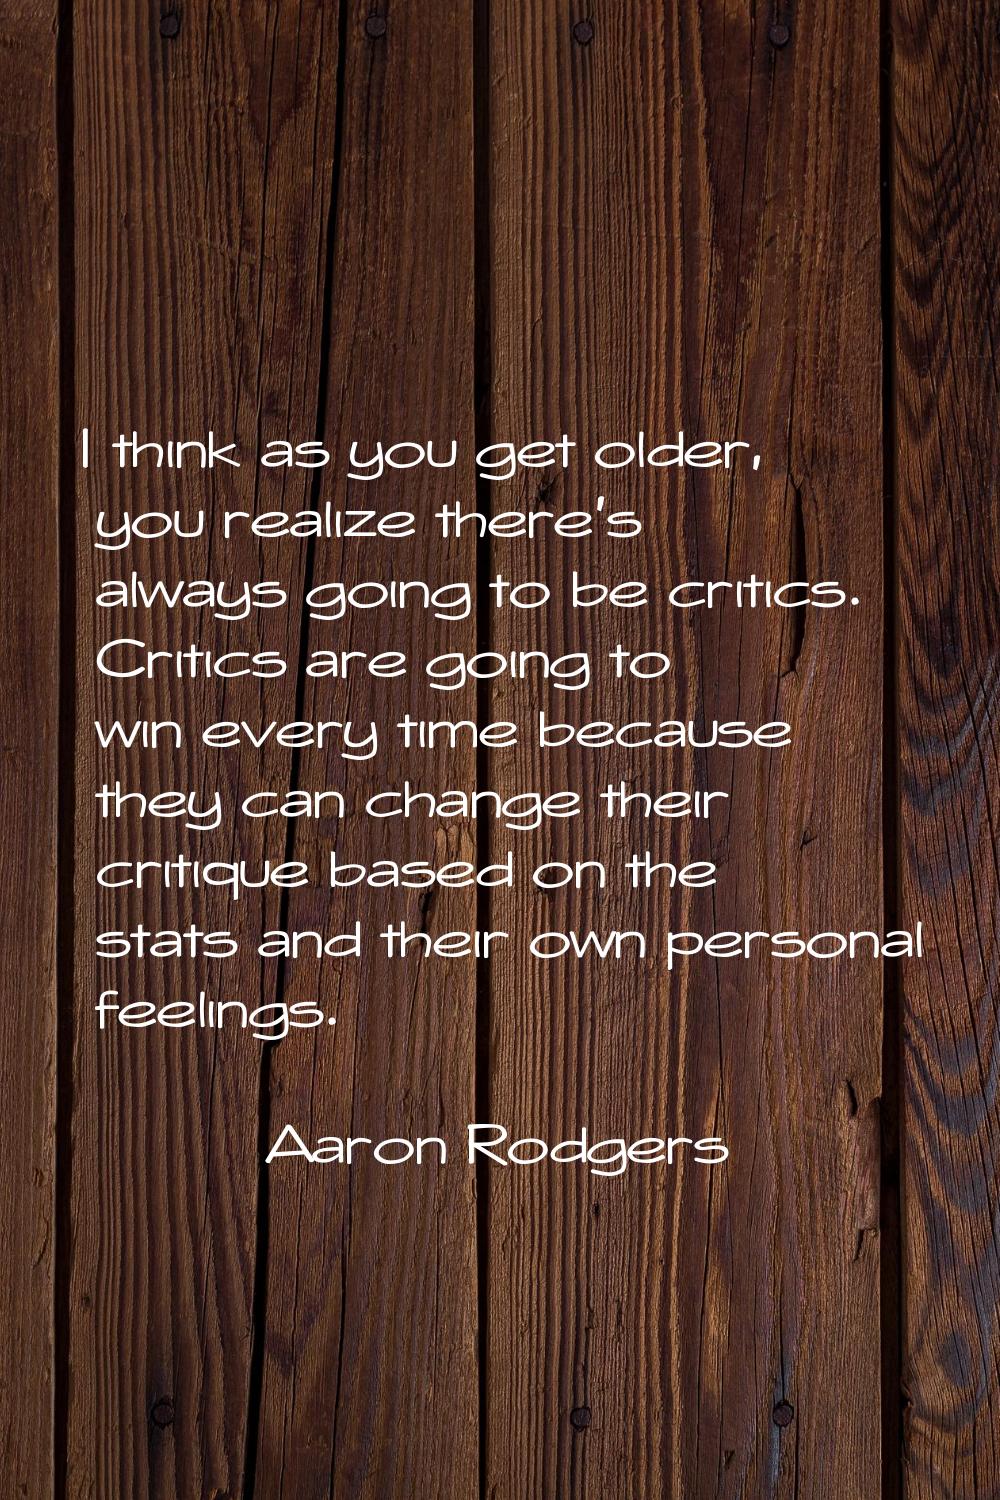 I think as you get older, you realize there's always going to be critics. Critics are going to win 